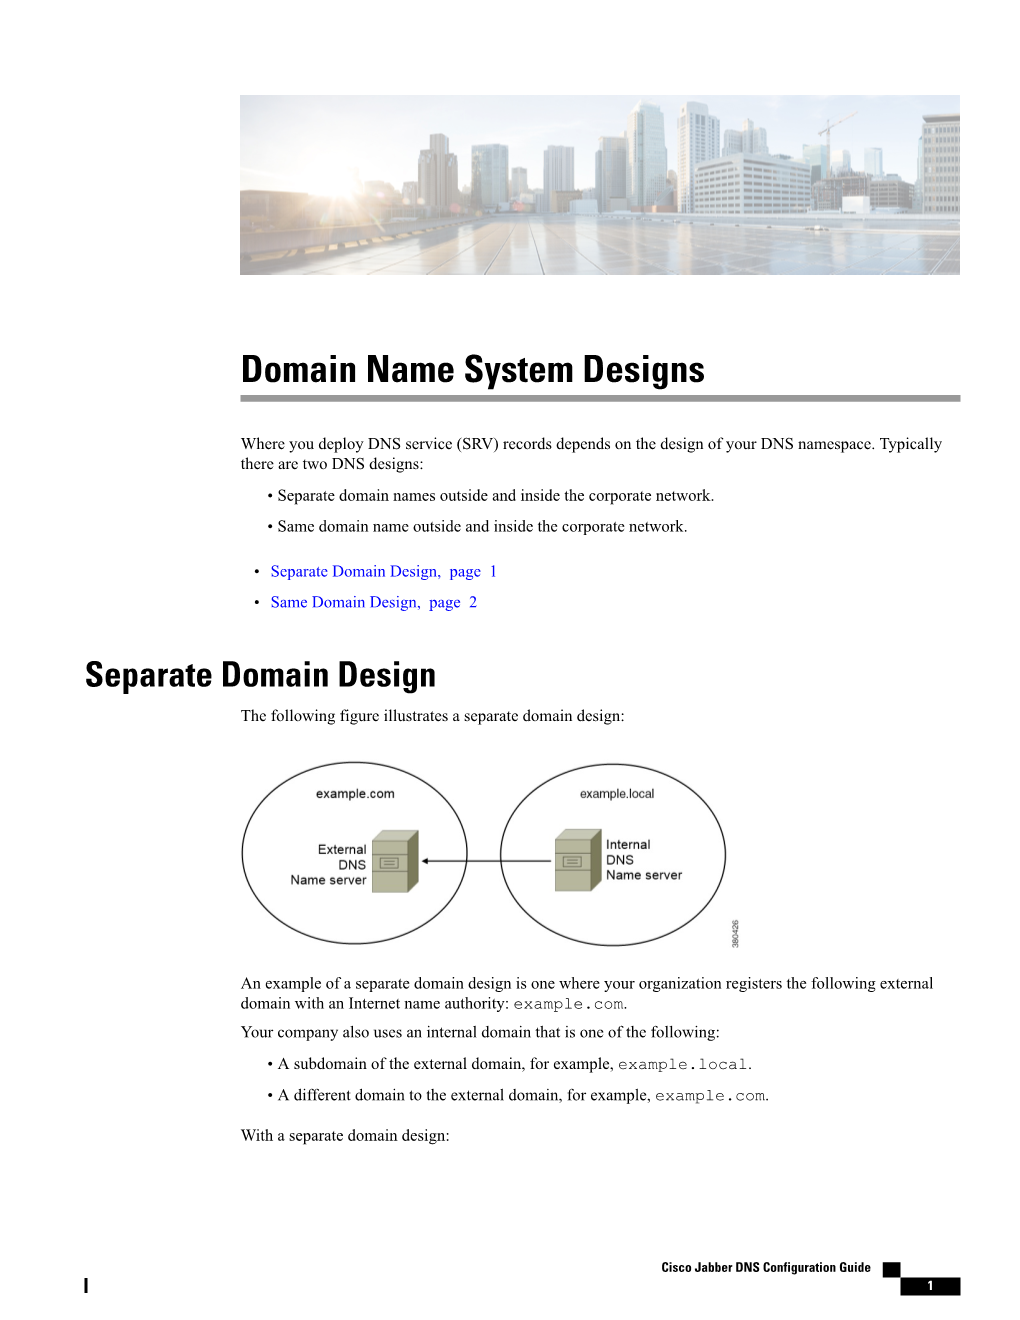 Domain Name System Designs